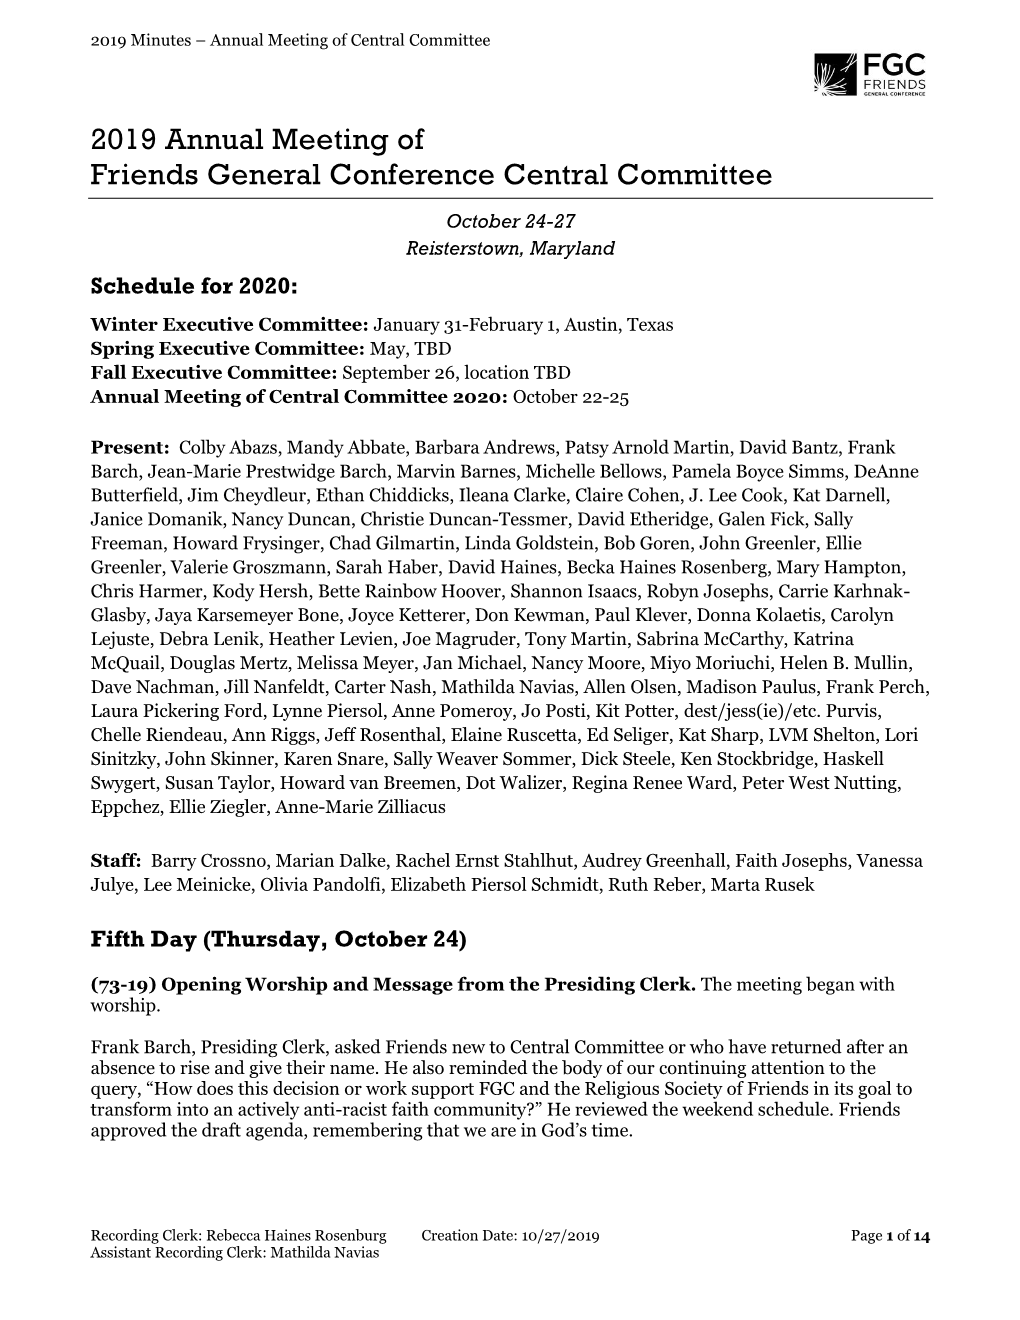 2019 Annual Meeting of Friends General Conference Central Committee